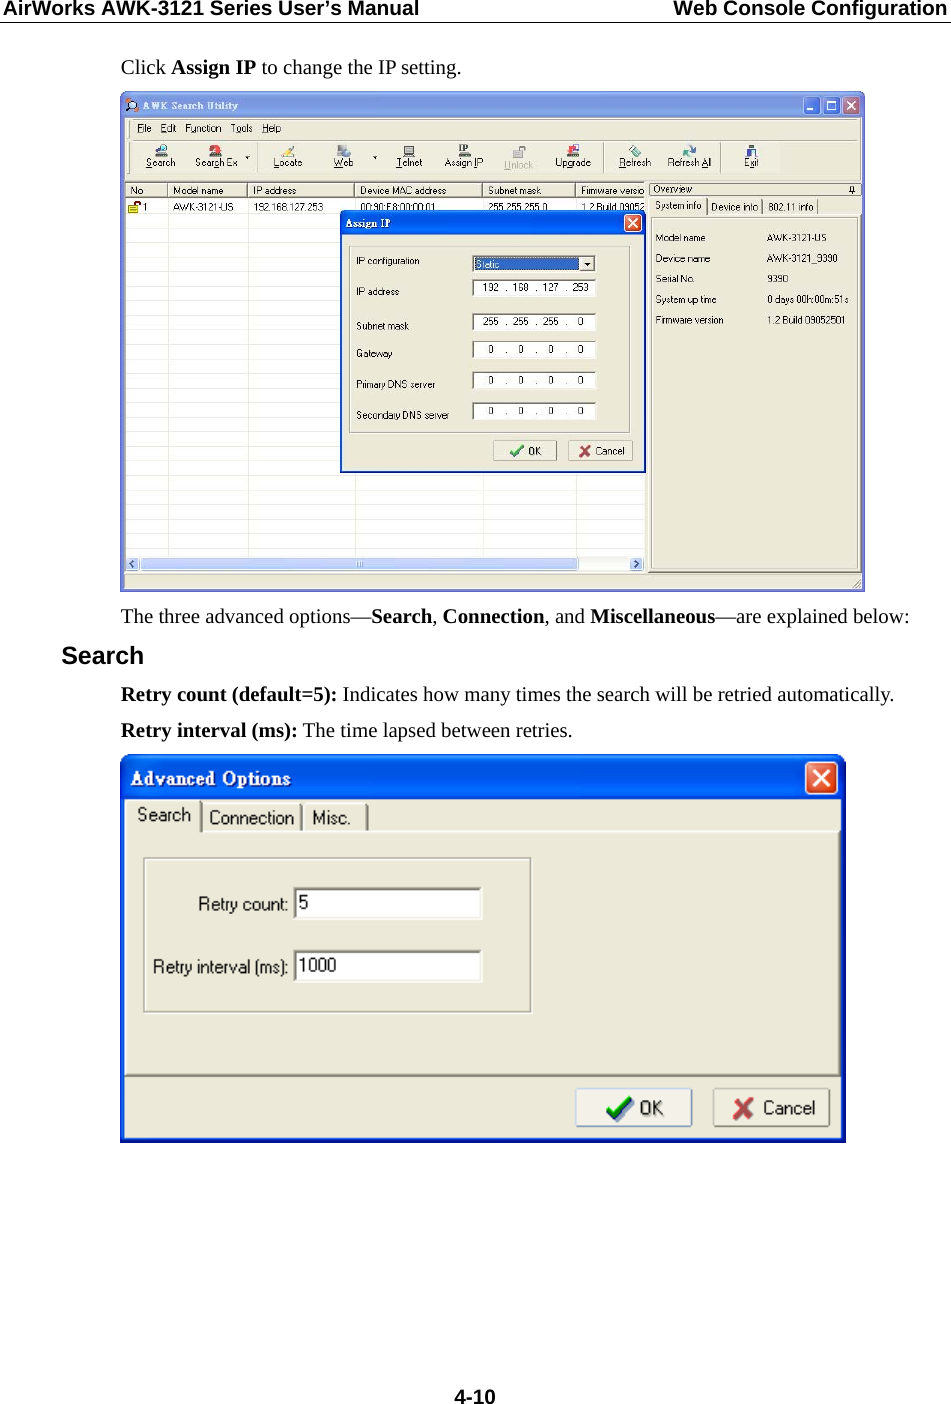 AirWorks AWK-3121 Series User’s Manual  Web Console Configuration  4-10Click Assign IP to change the IP setting.  The three advanced options—Search, Connection, and Miscellaneous—are explained below: Search Retry count (default=5): Indicates how many times the search will be retried automatically. Retry interval (ms): The time lapsed between retries.       